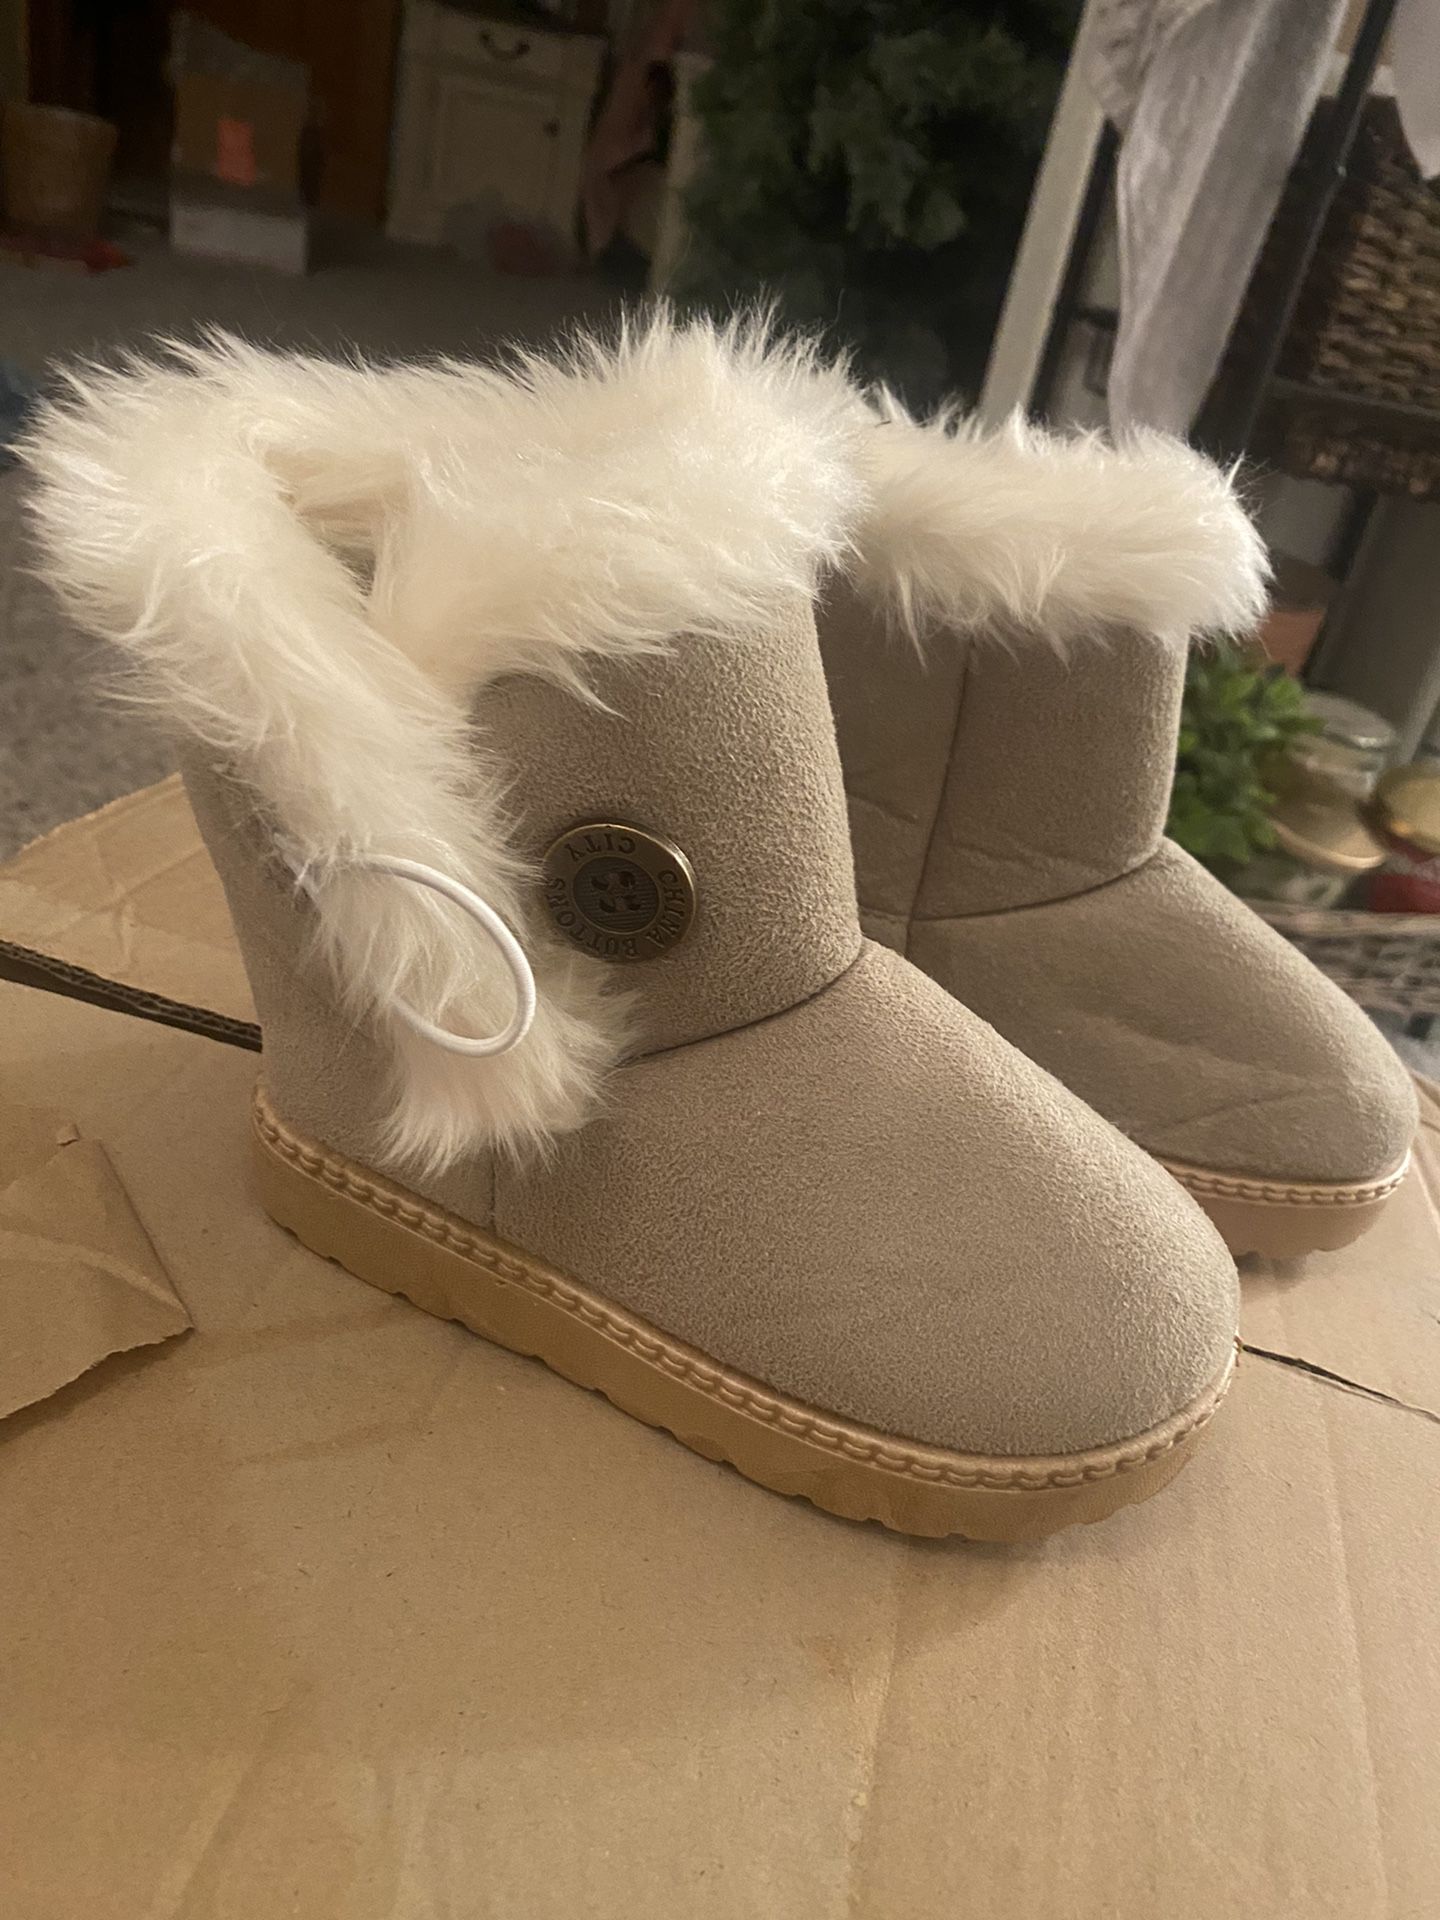 Brand New Little Girls Button Boots For Sale Size 9.5 Warm Cute Fuzzy 